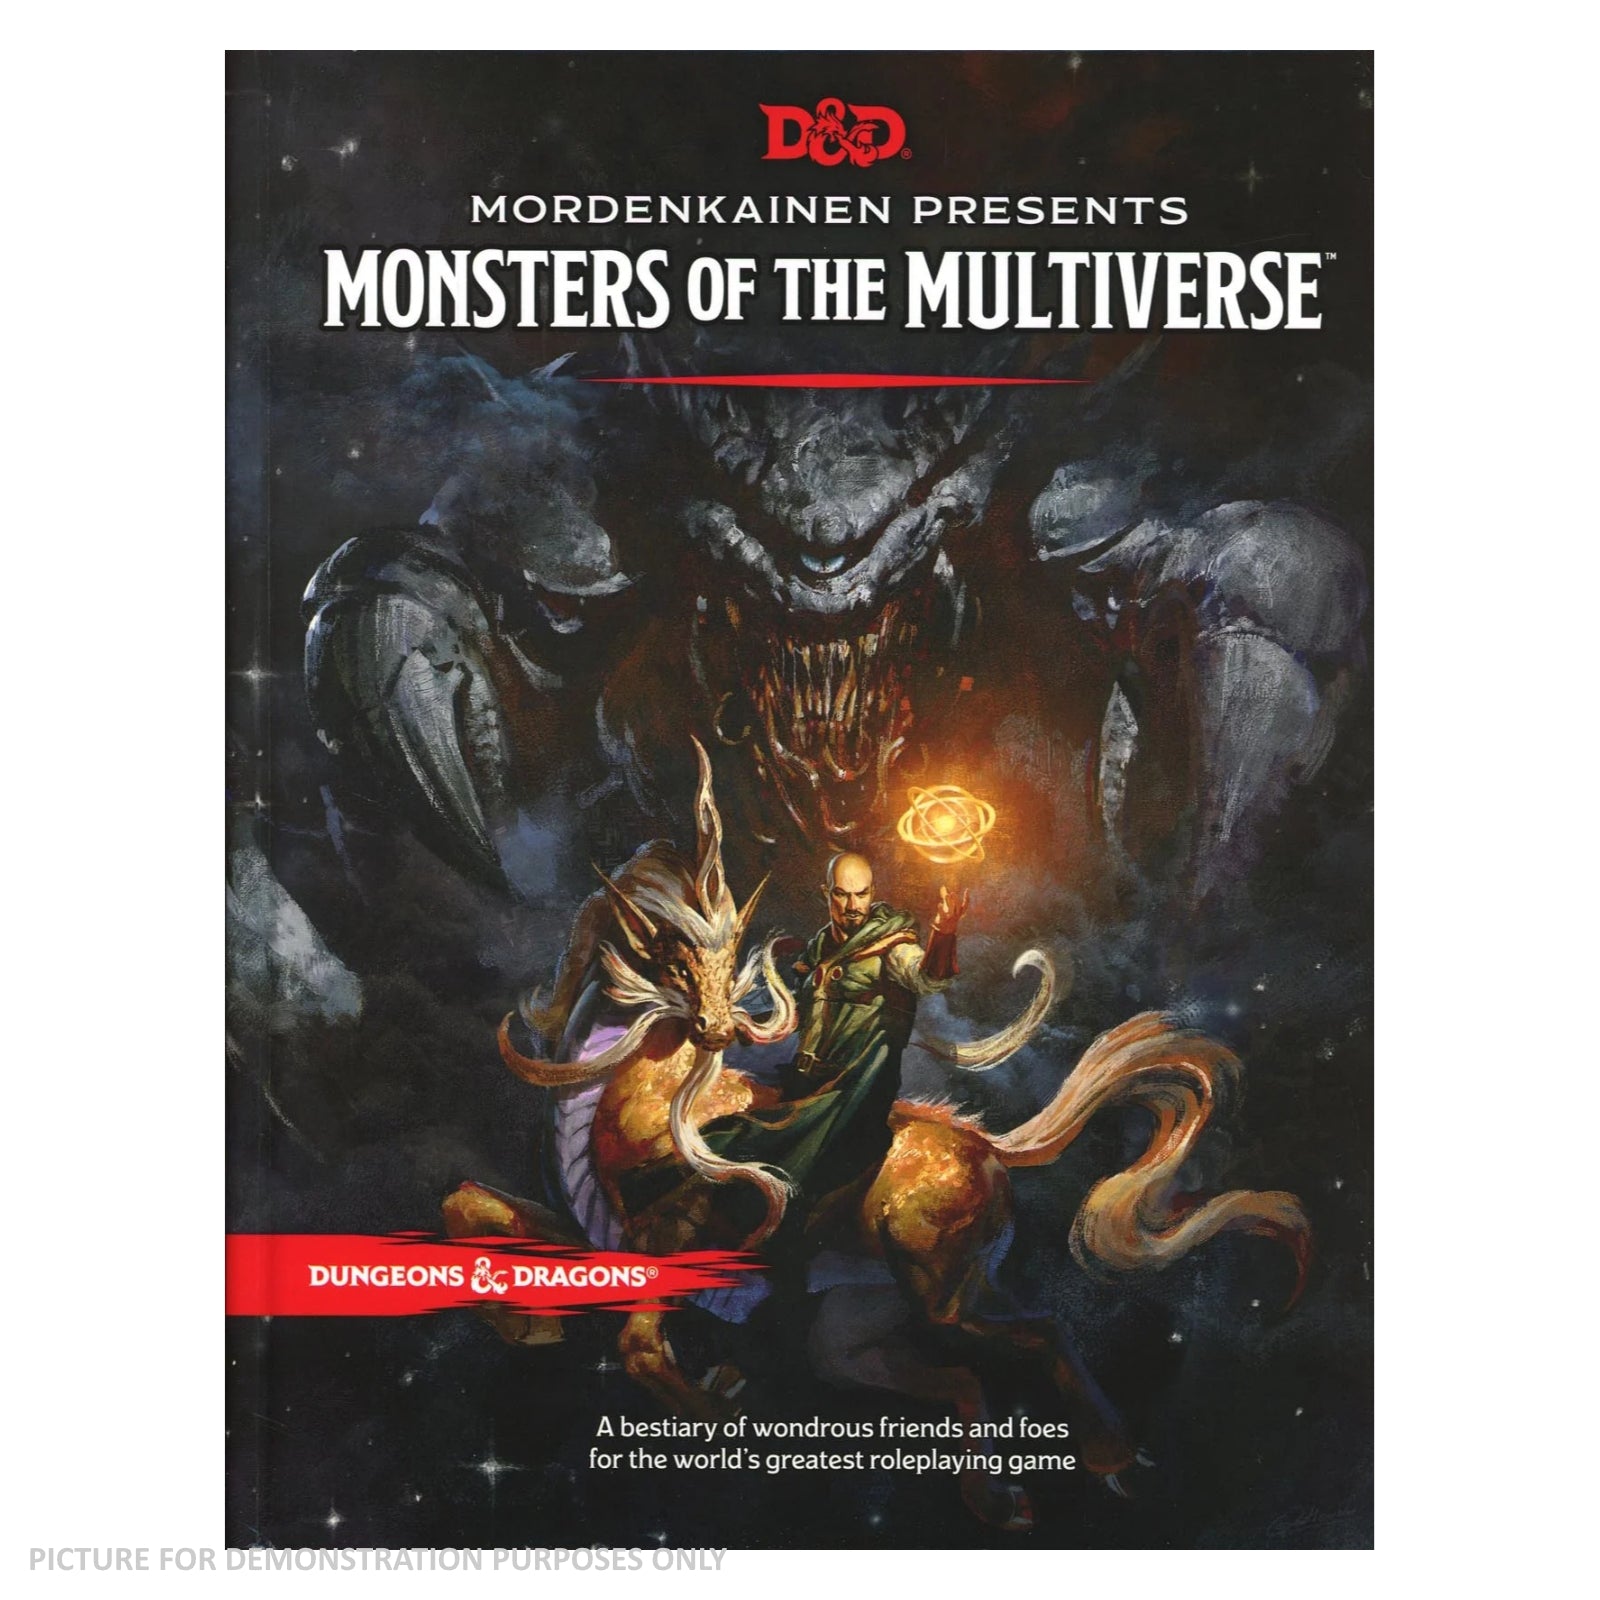 Dungeons & Dragons Mordenkainen Presents Monsters of the Multiverse